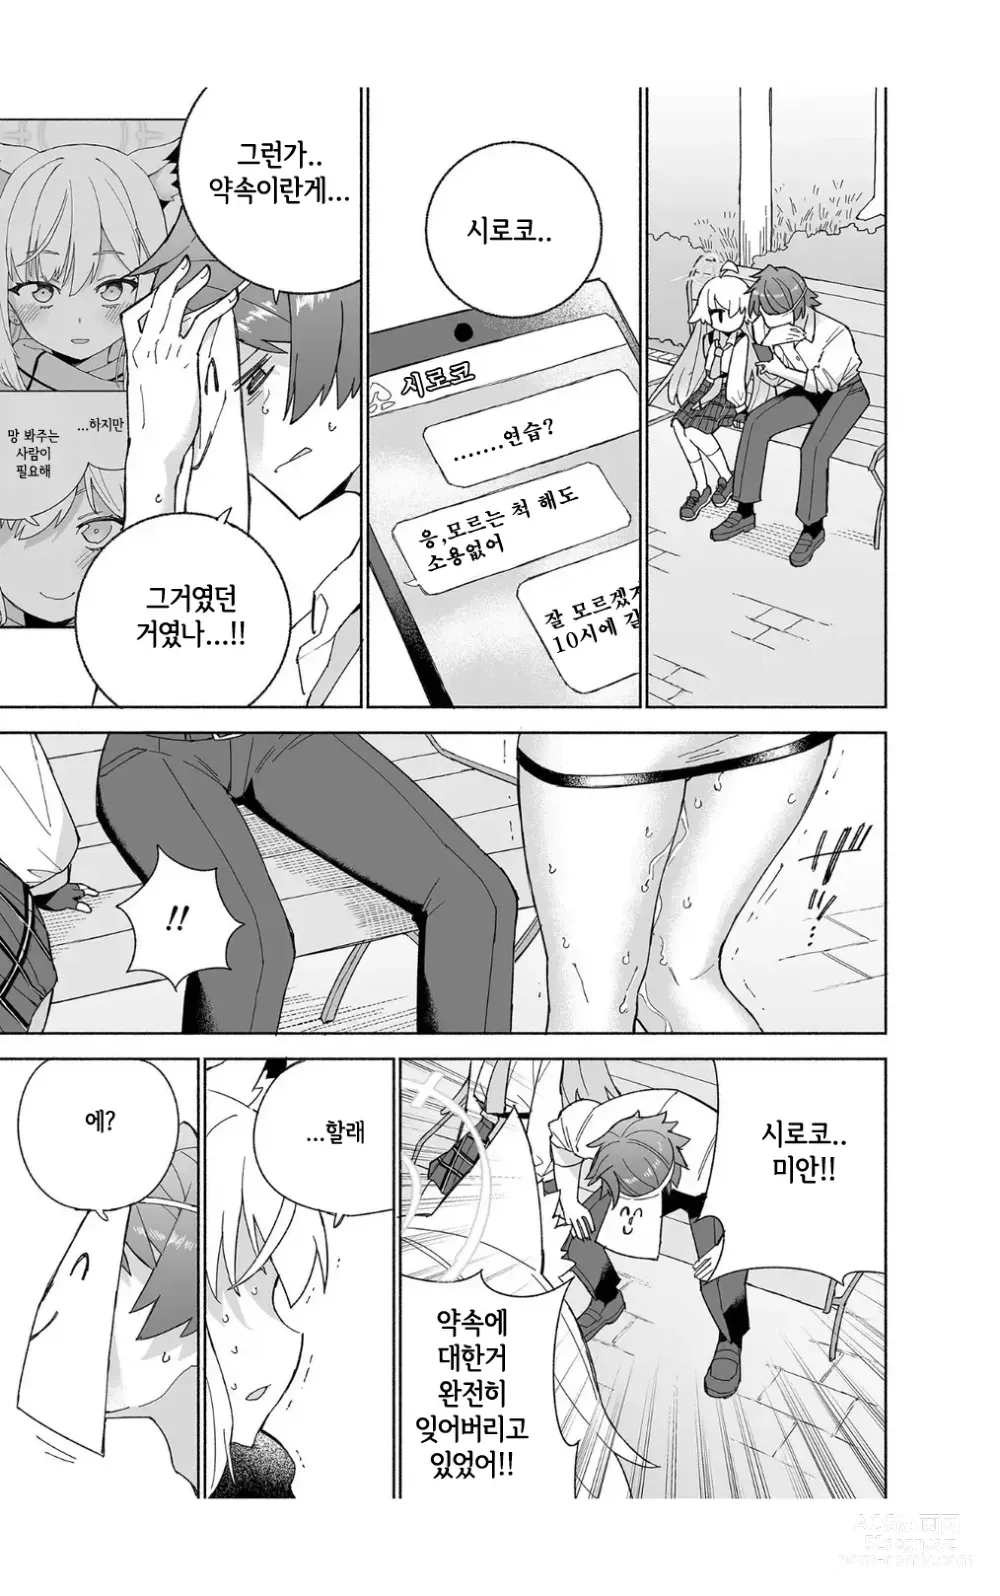 Page 20 of doujinshi 늑대의 물